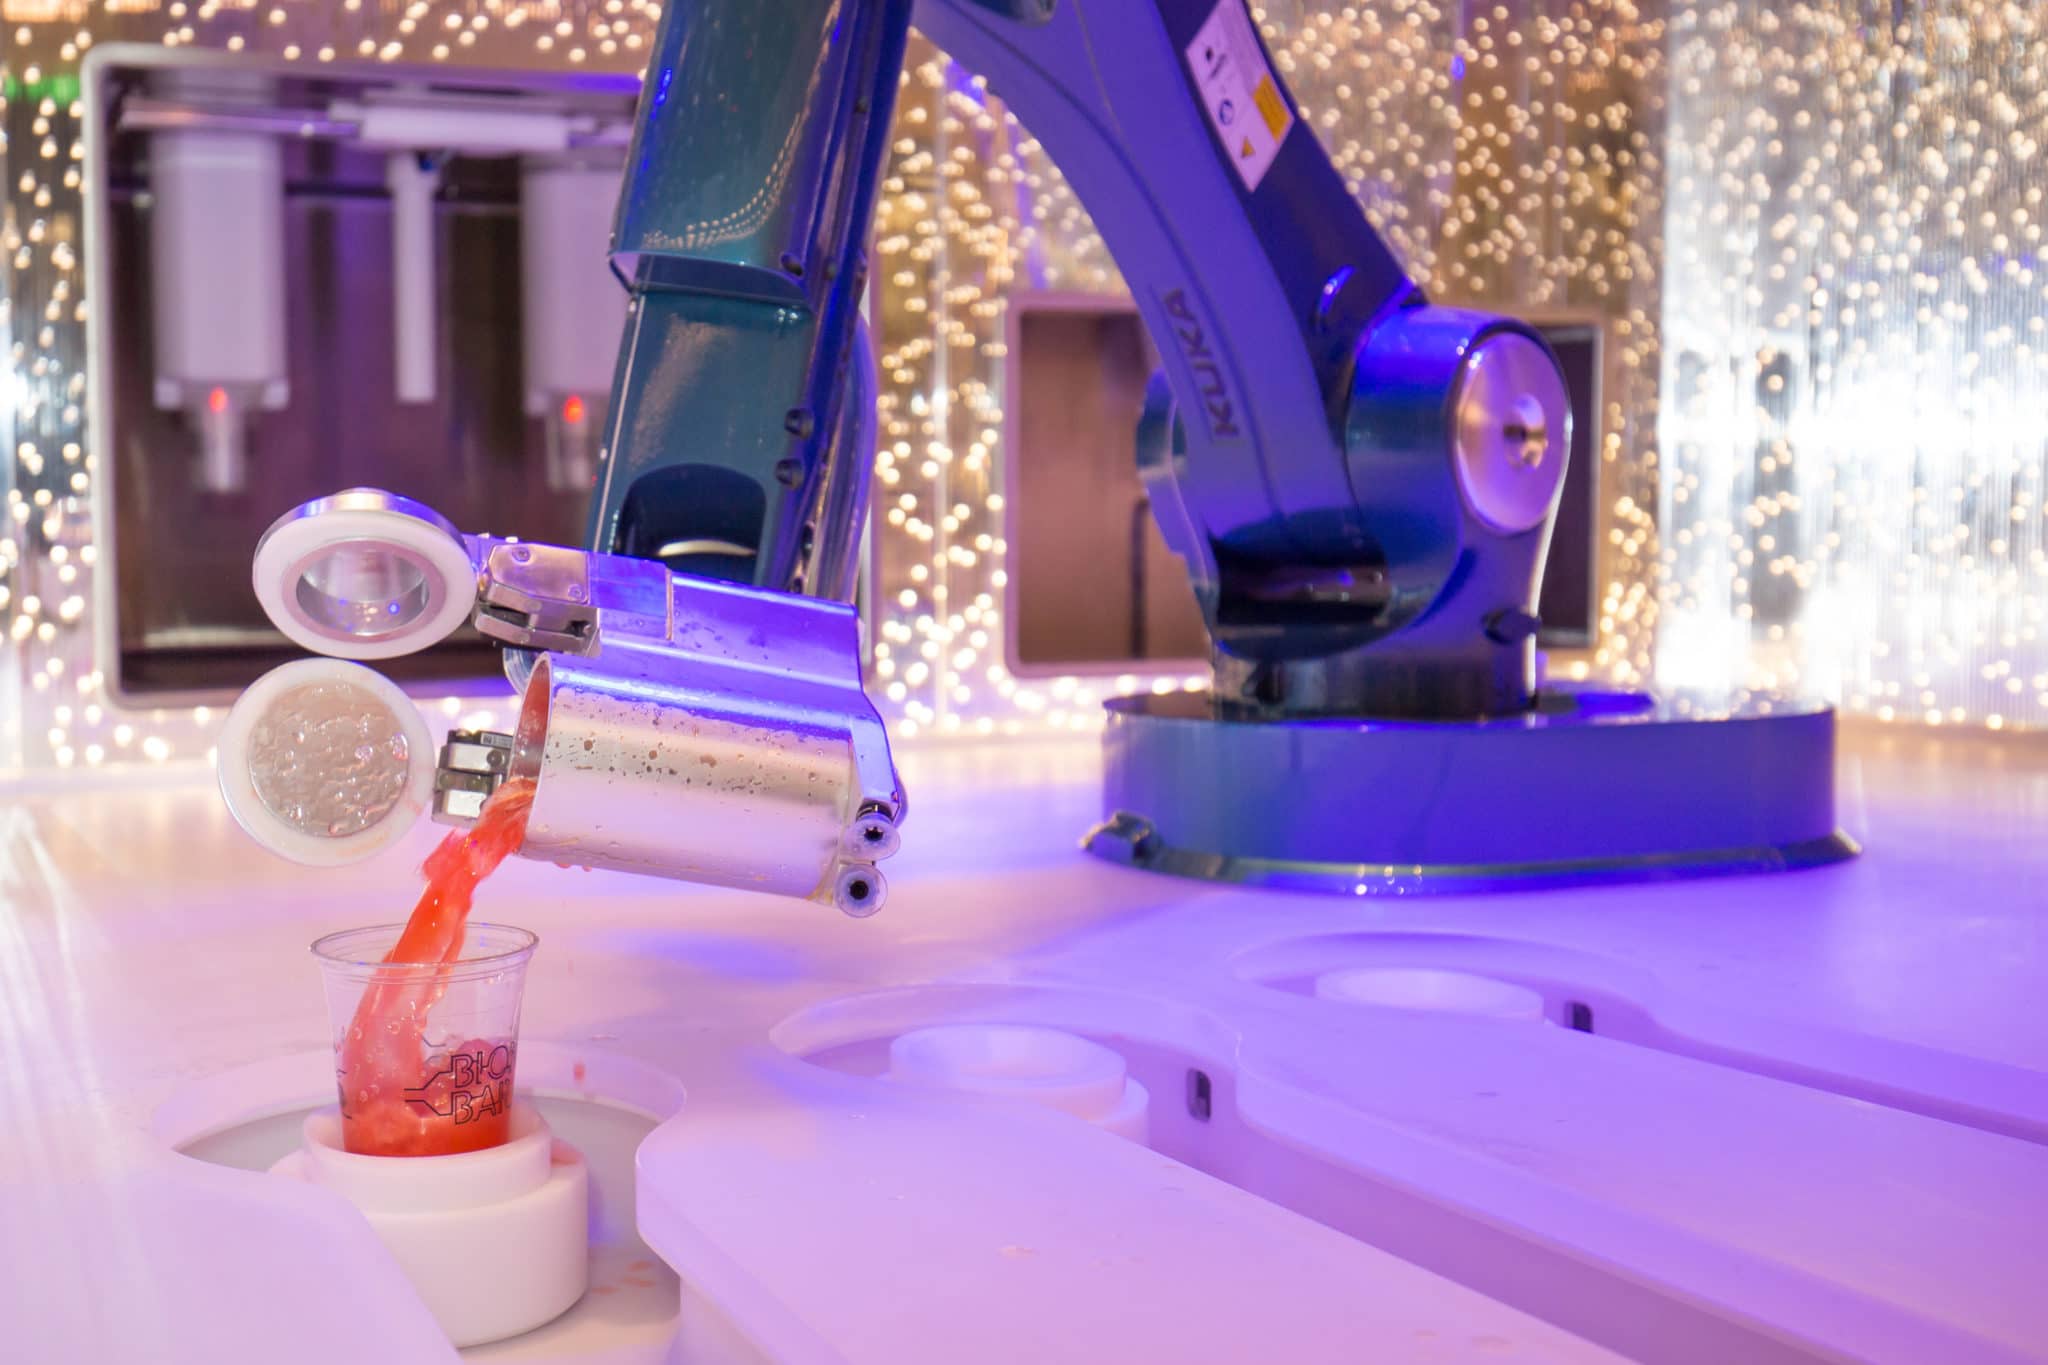 Robotic Bartenders and the Future of Work